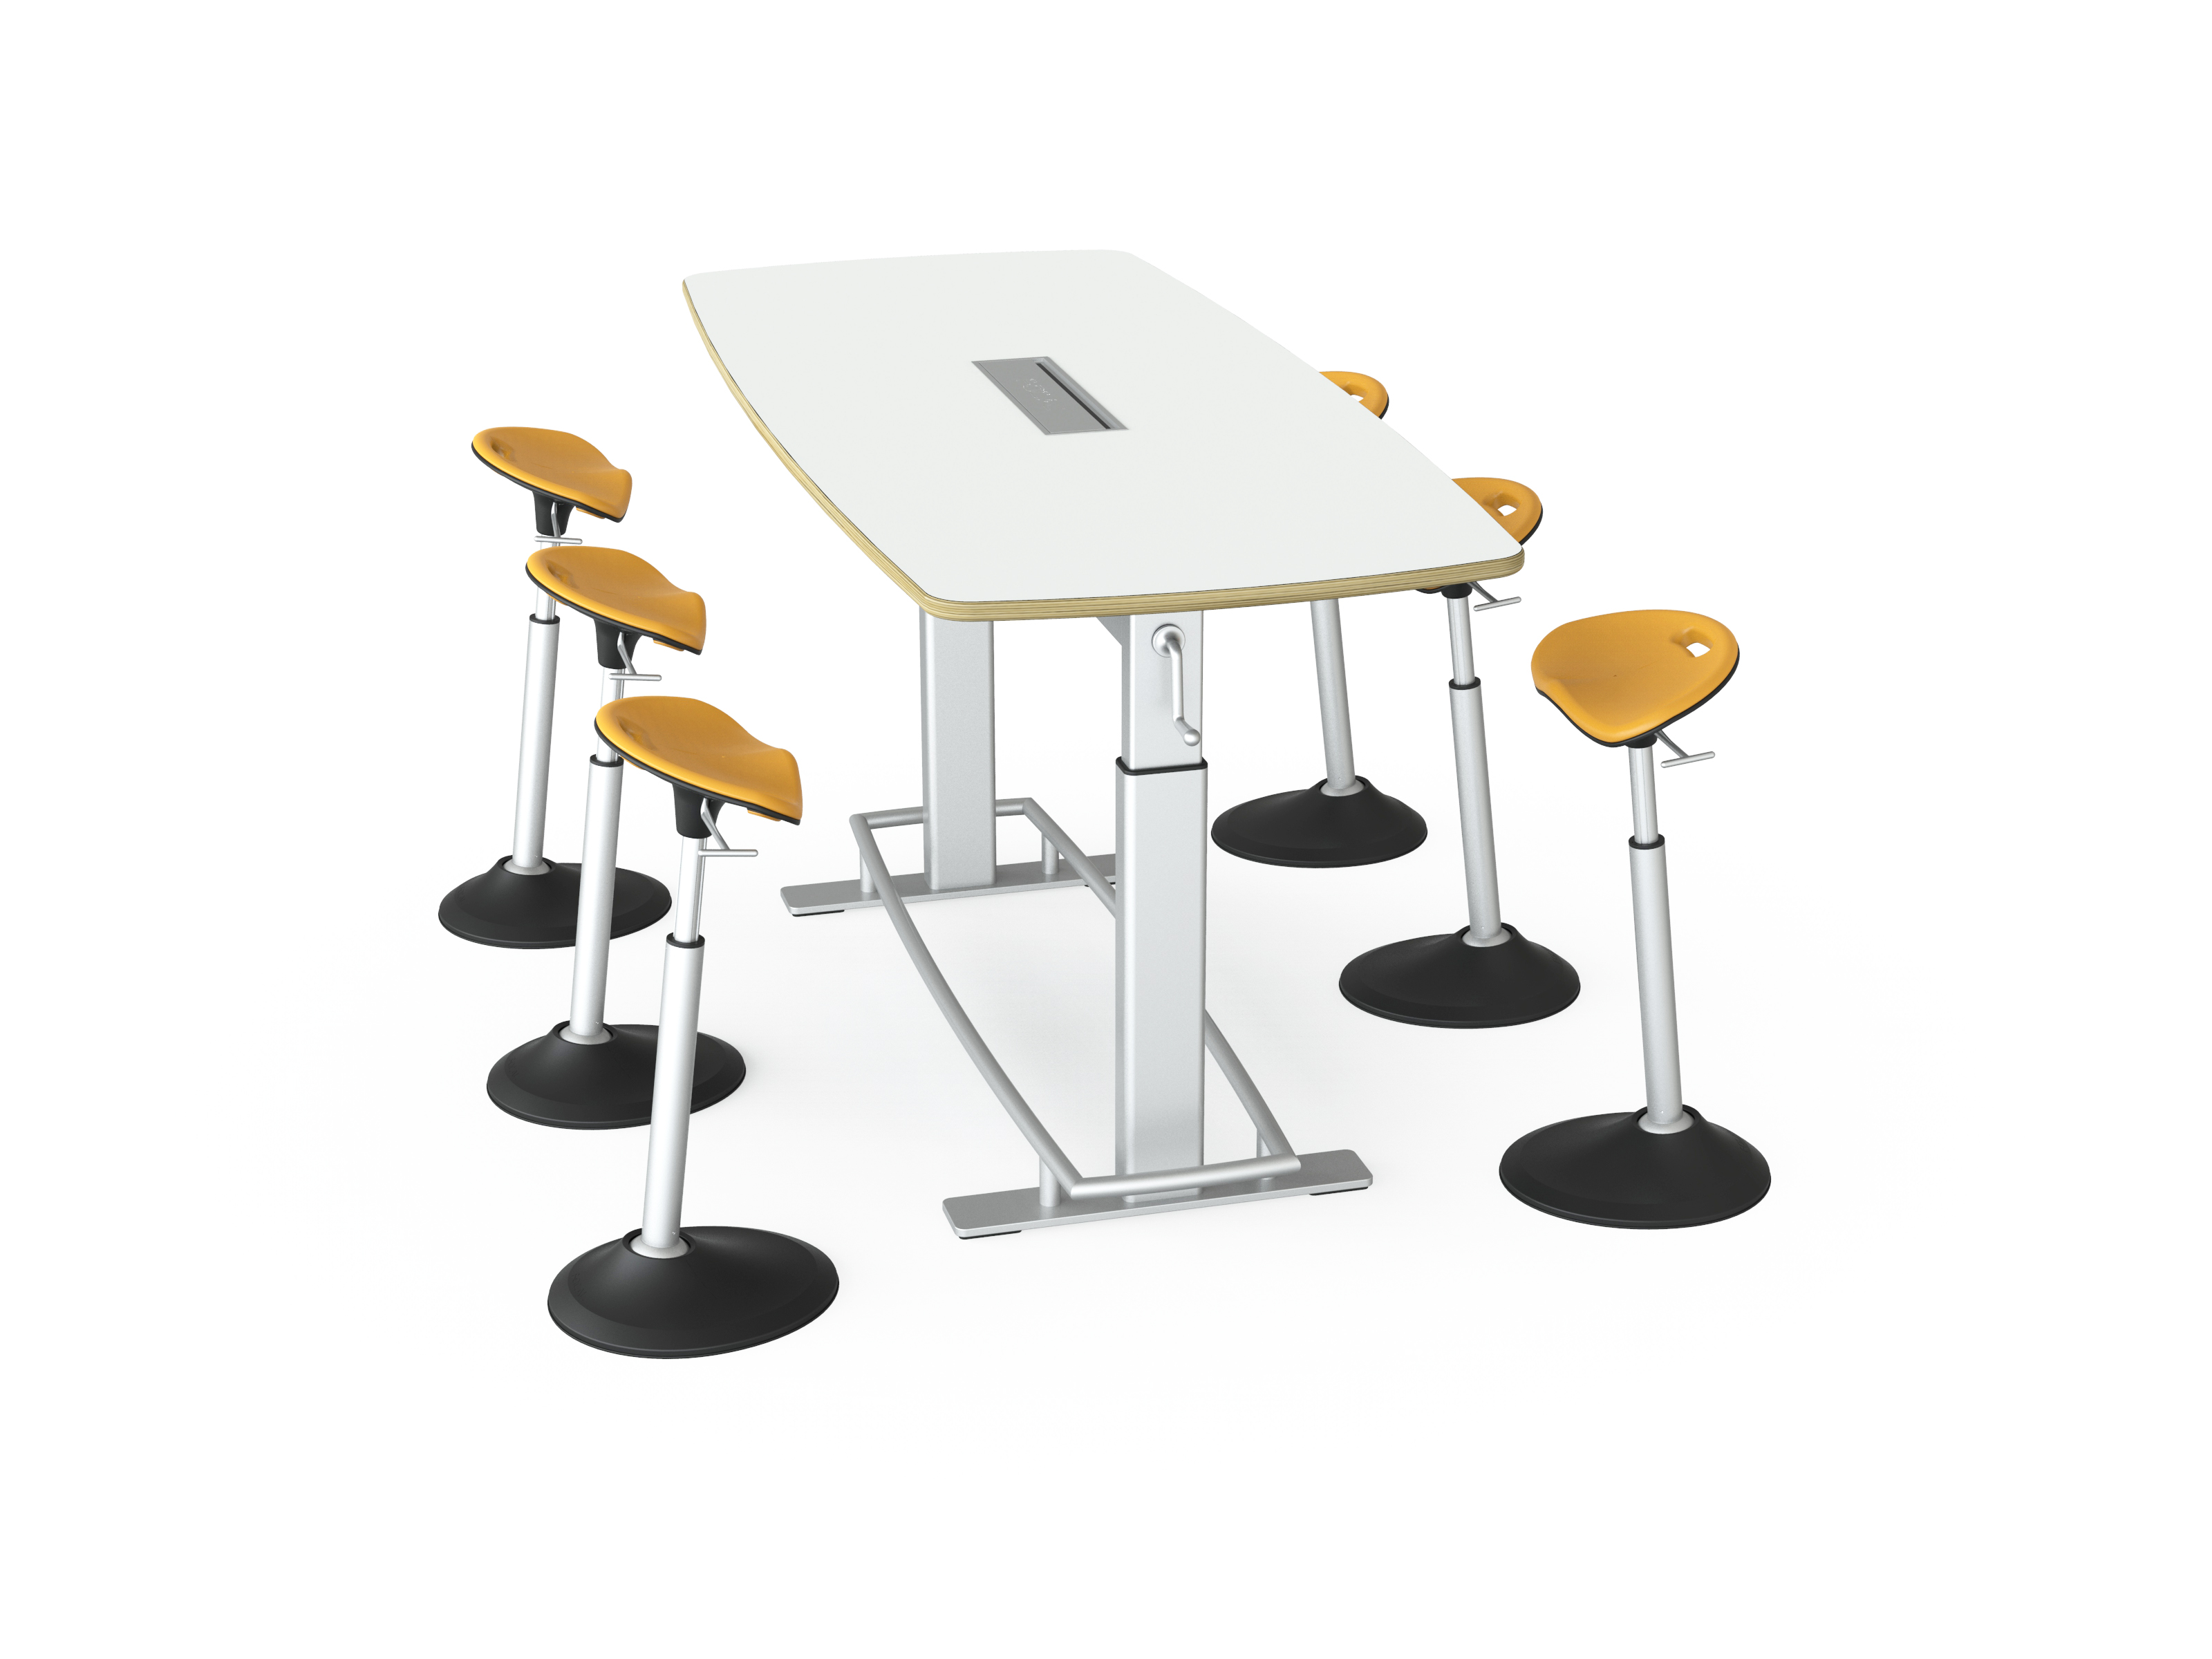 The Award-Winning Confluence Collaboration Table